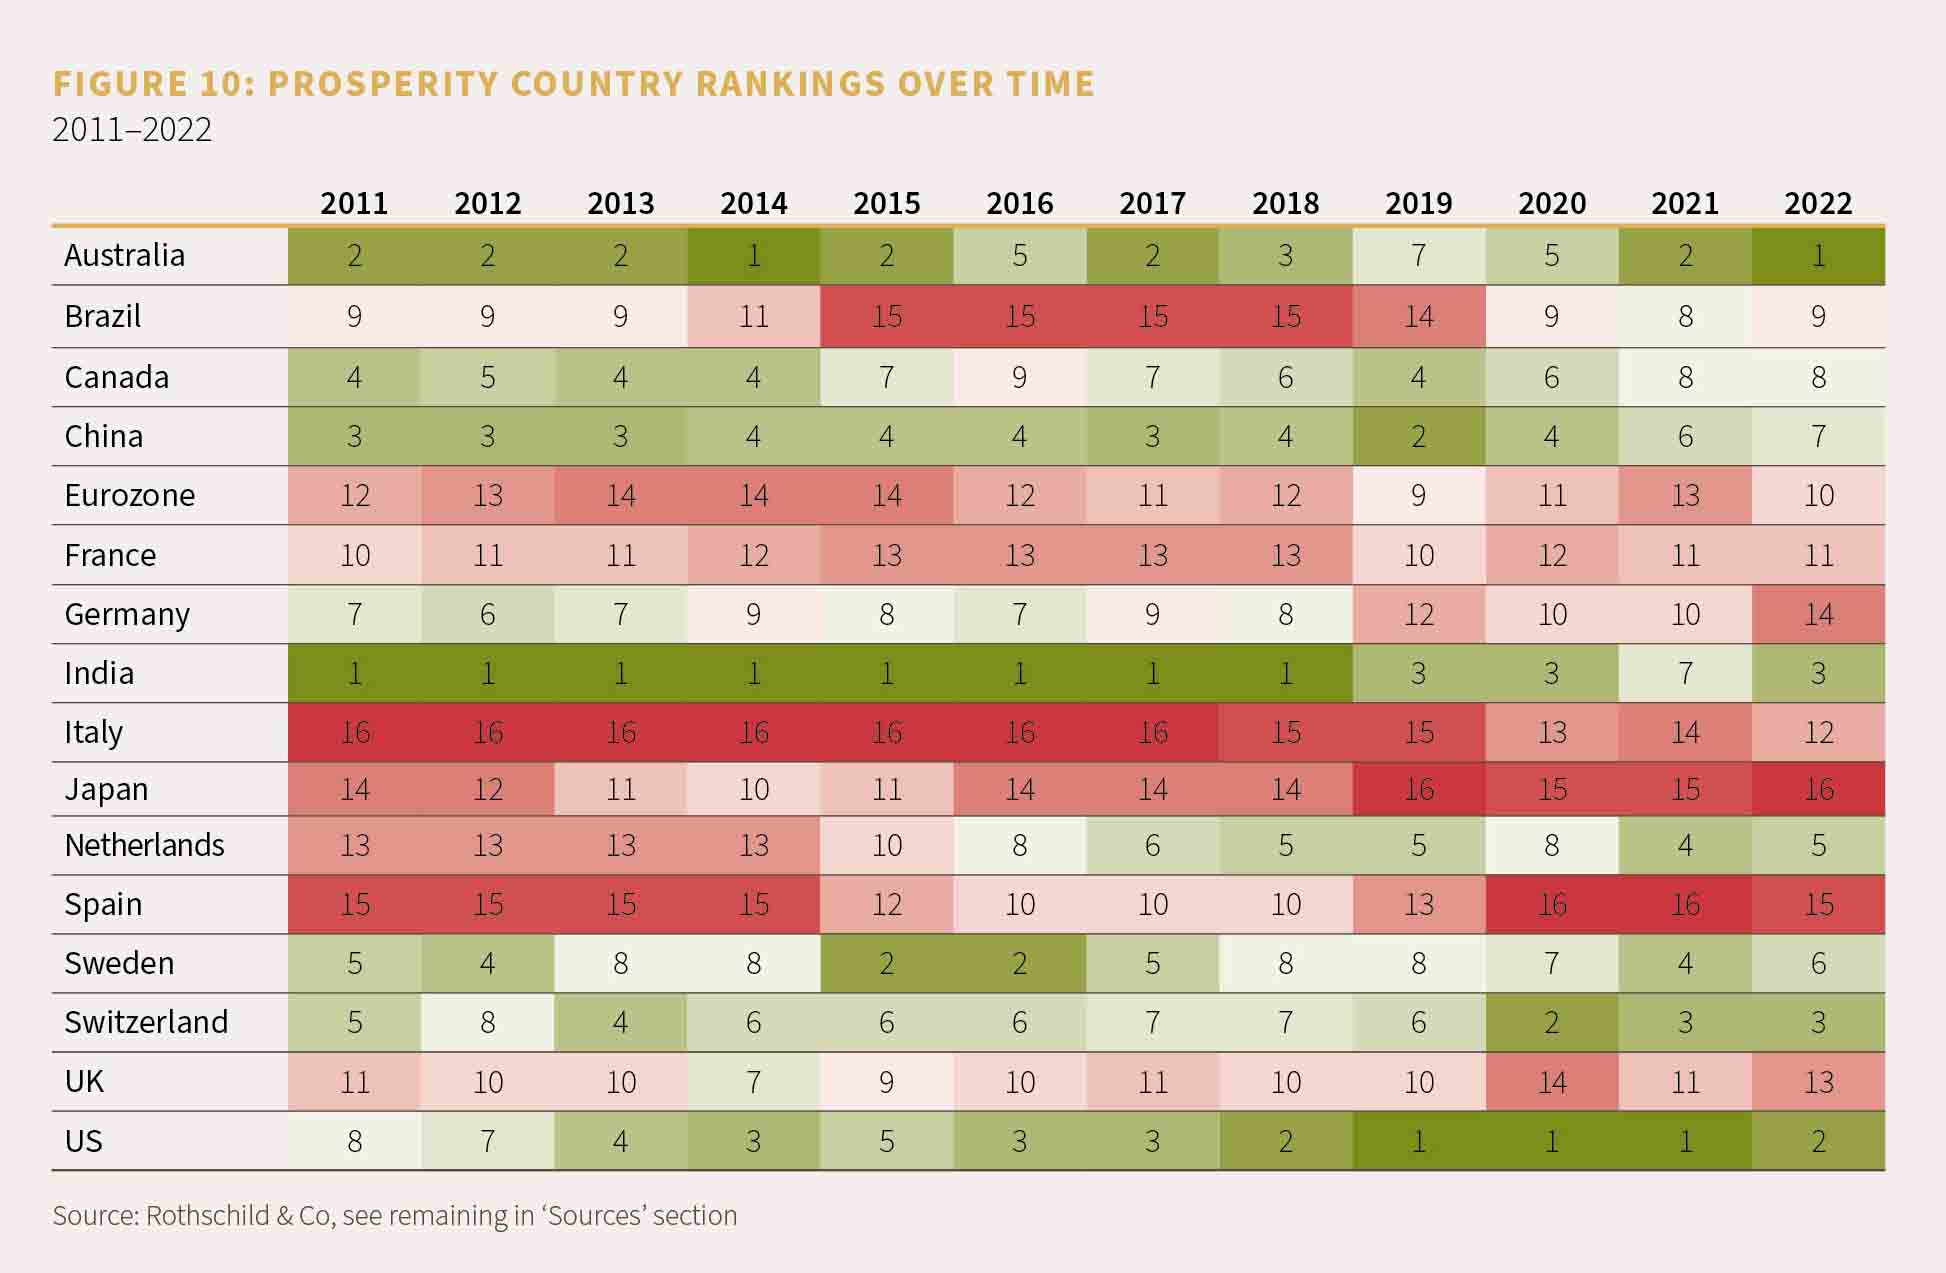 Chart showing prosperity country rankings over time 